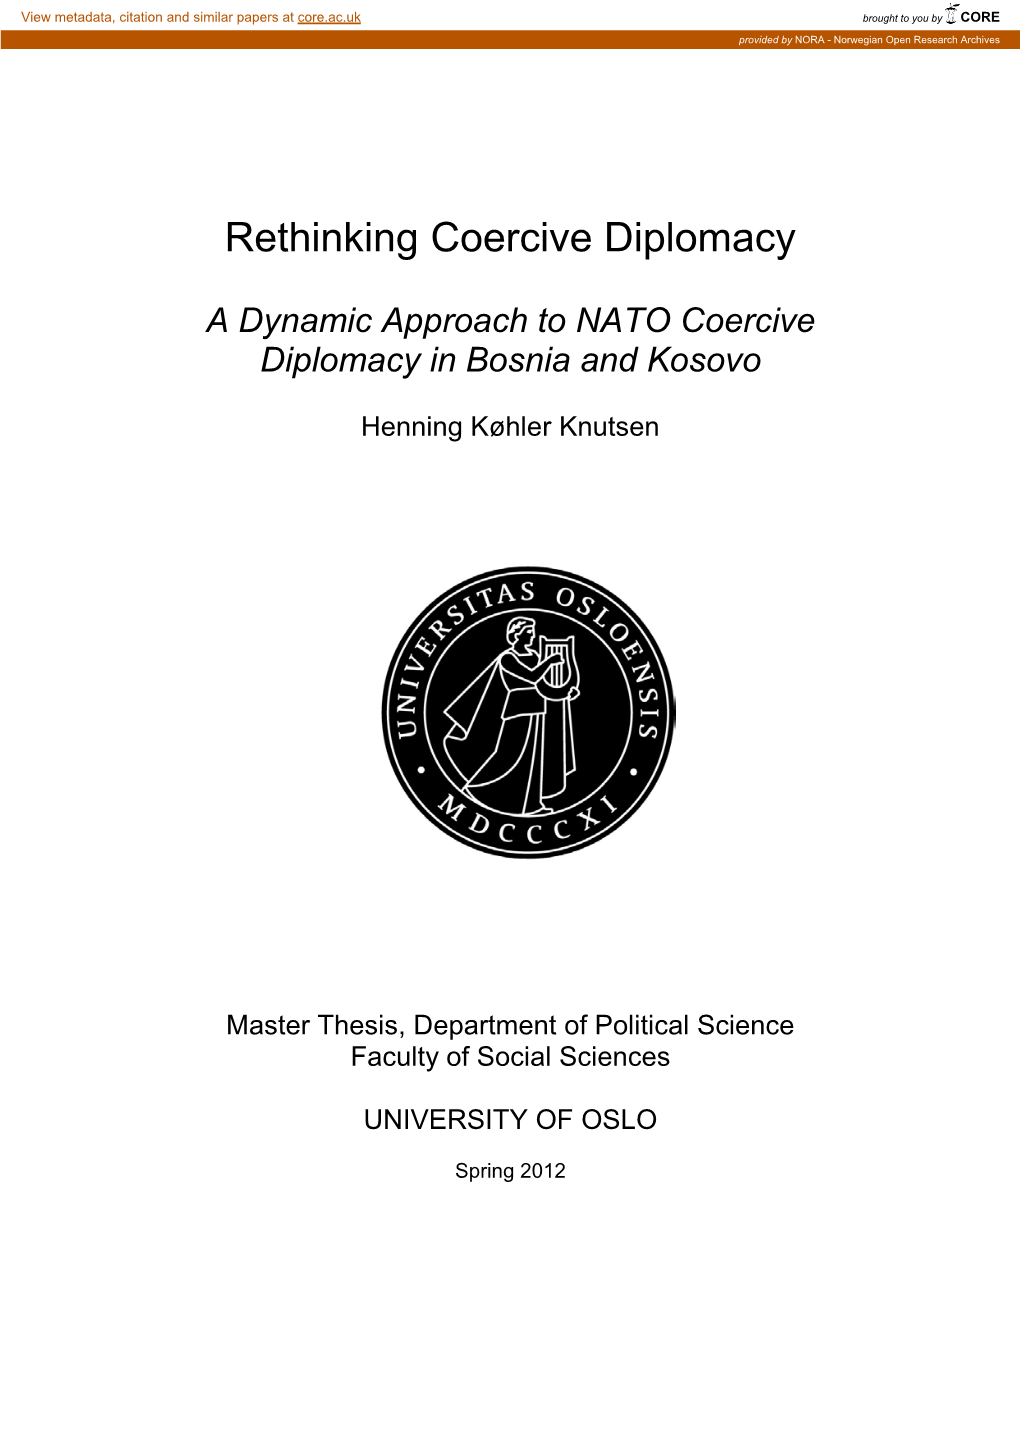 A Dynamic Approach to NATO Coercive Diplomacy in Bosnia and Kosovo